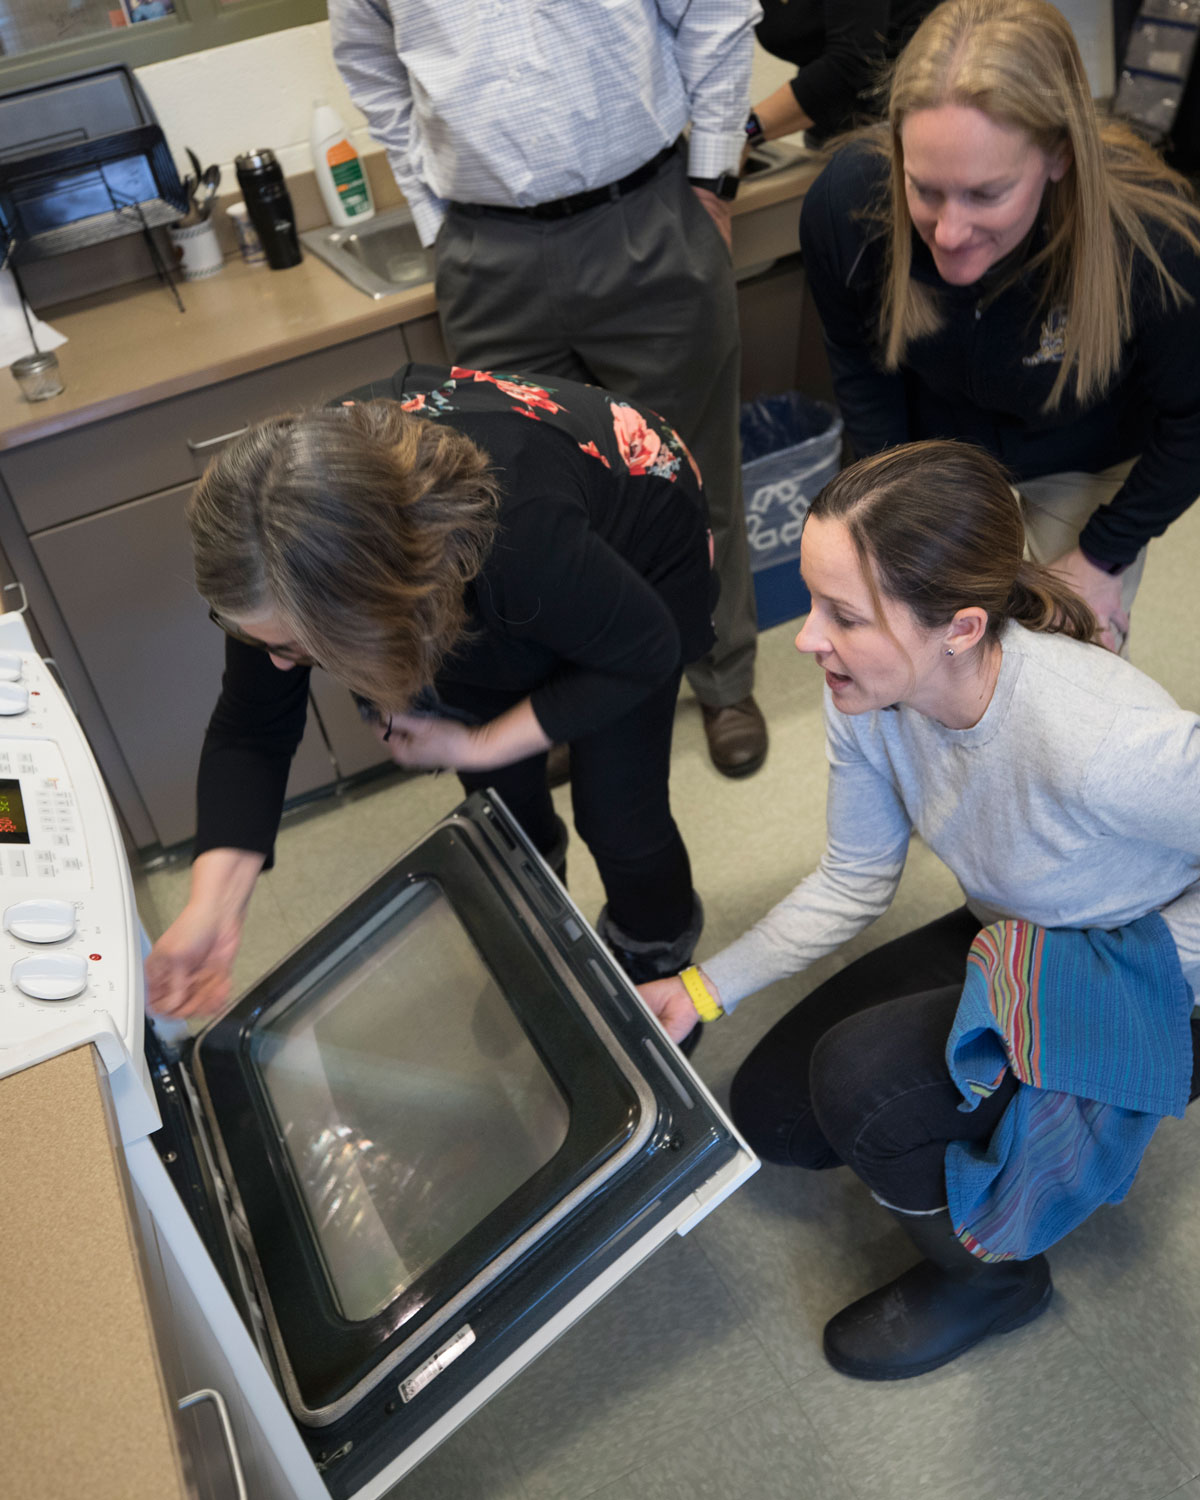 3 employees open an oven door and look inside to check on the food they made during a wellness event